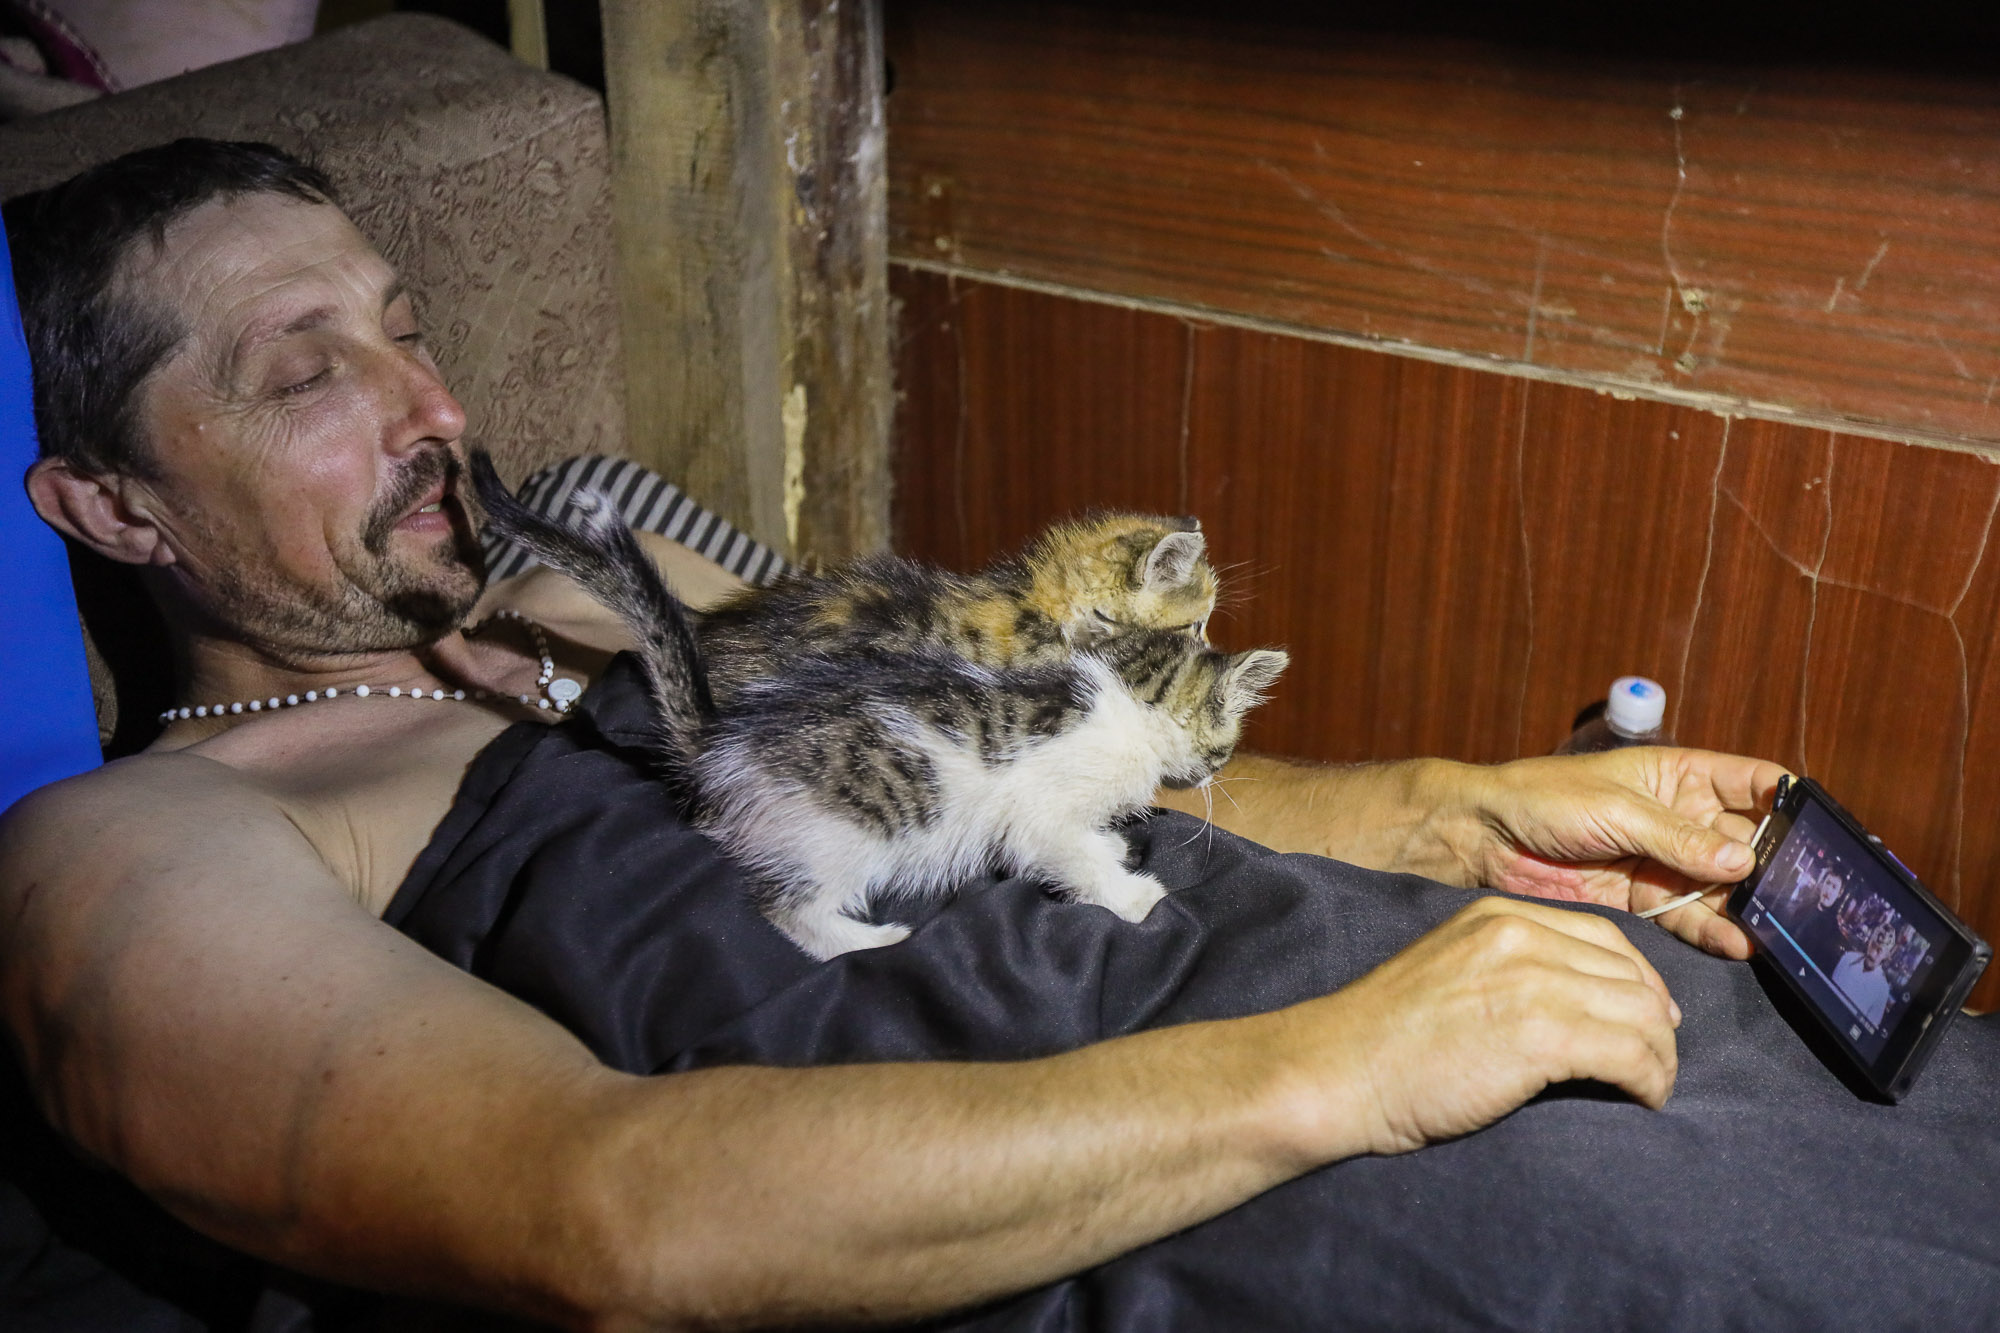 A Ukrainian soldier plays with kittens as he watches a video on his smartphone in the town of Zaitseve on June 25 